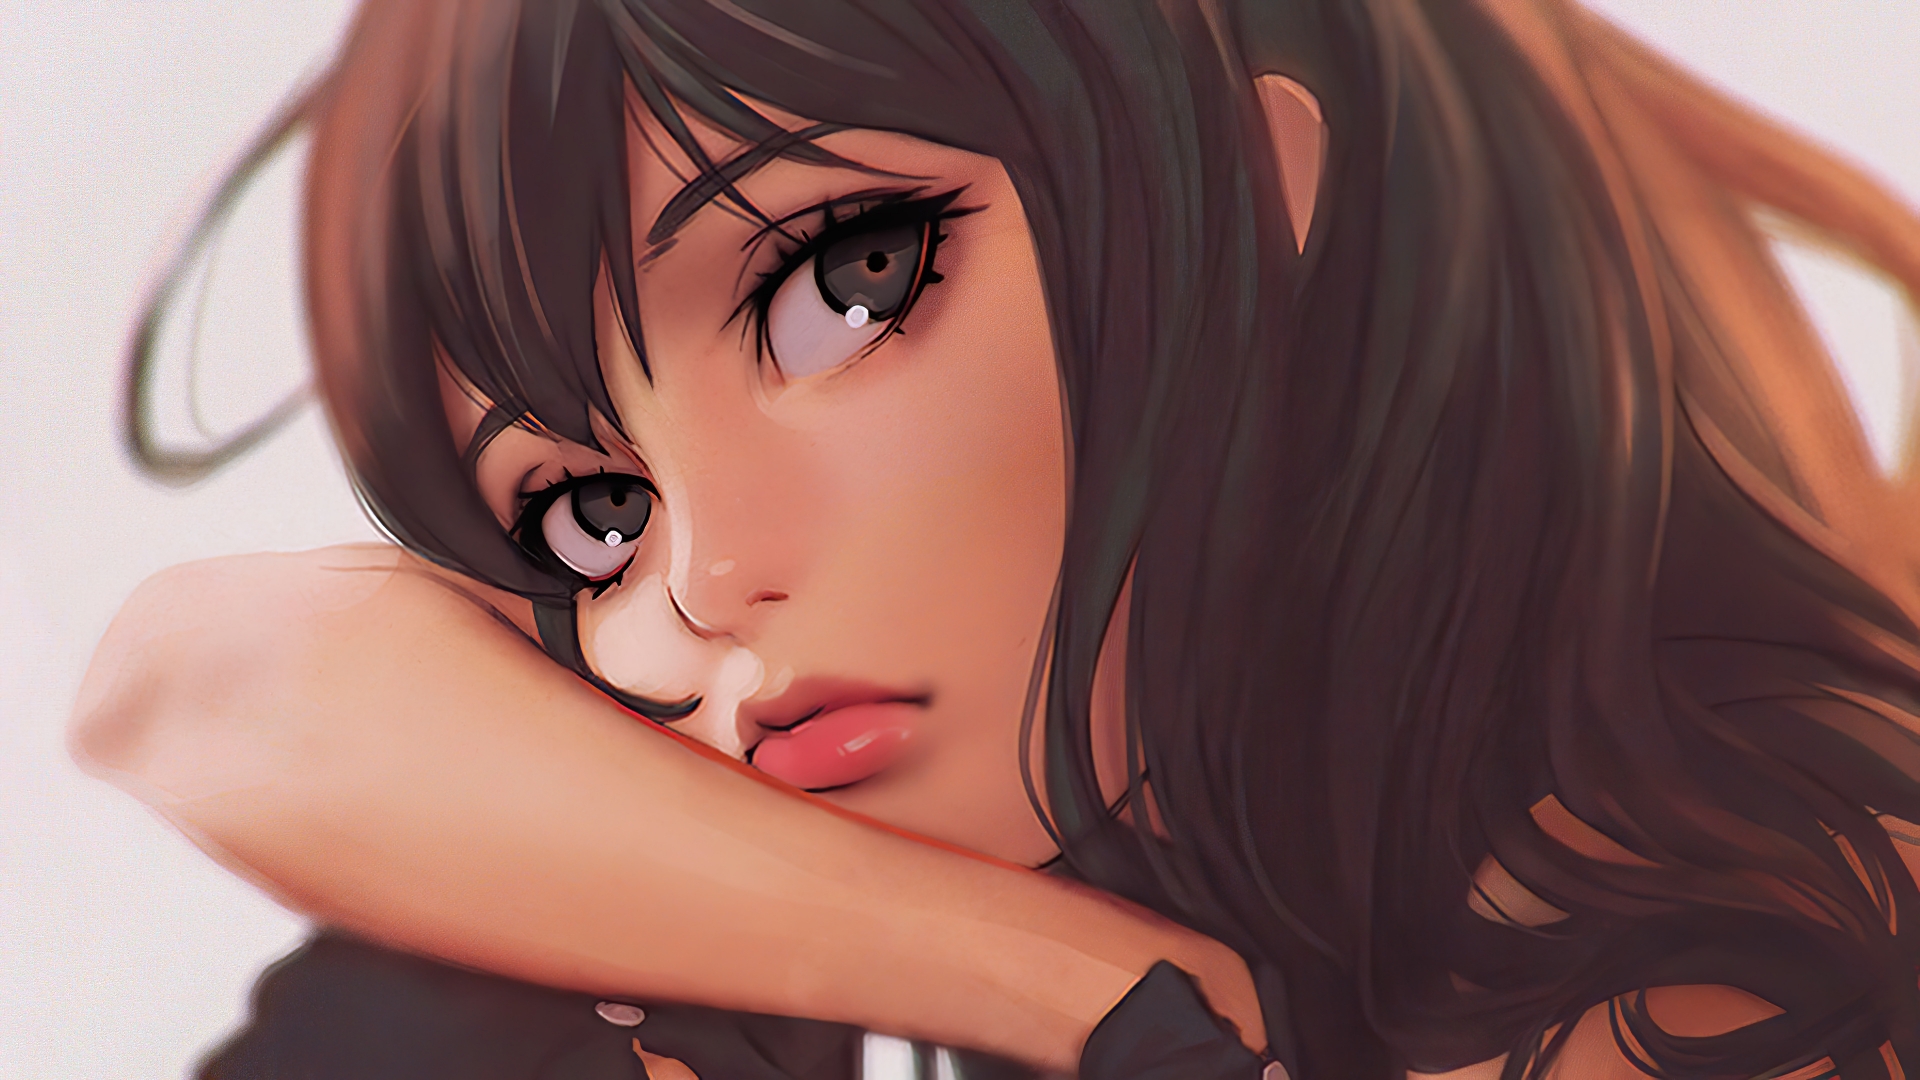 download 1920x1080 wallpaper kitchen, anime girl, thinking on thinking anime wallpapers